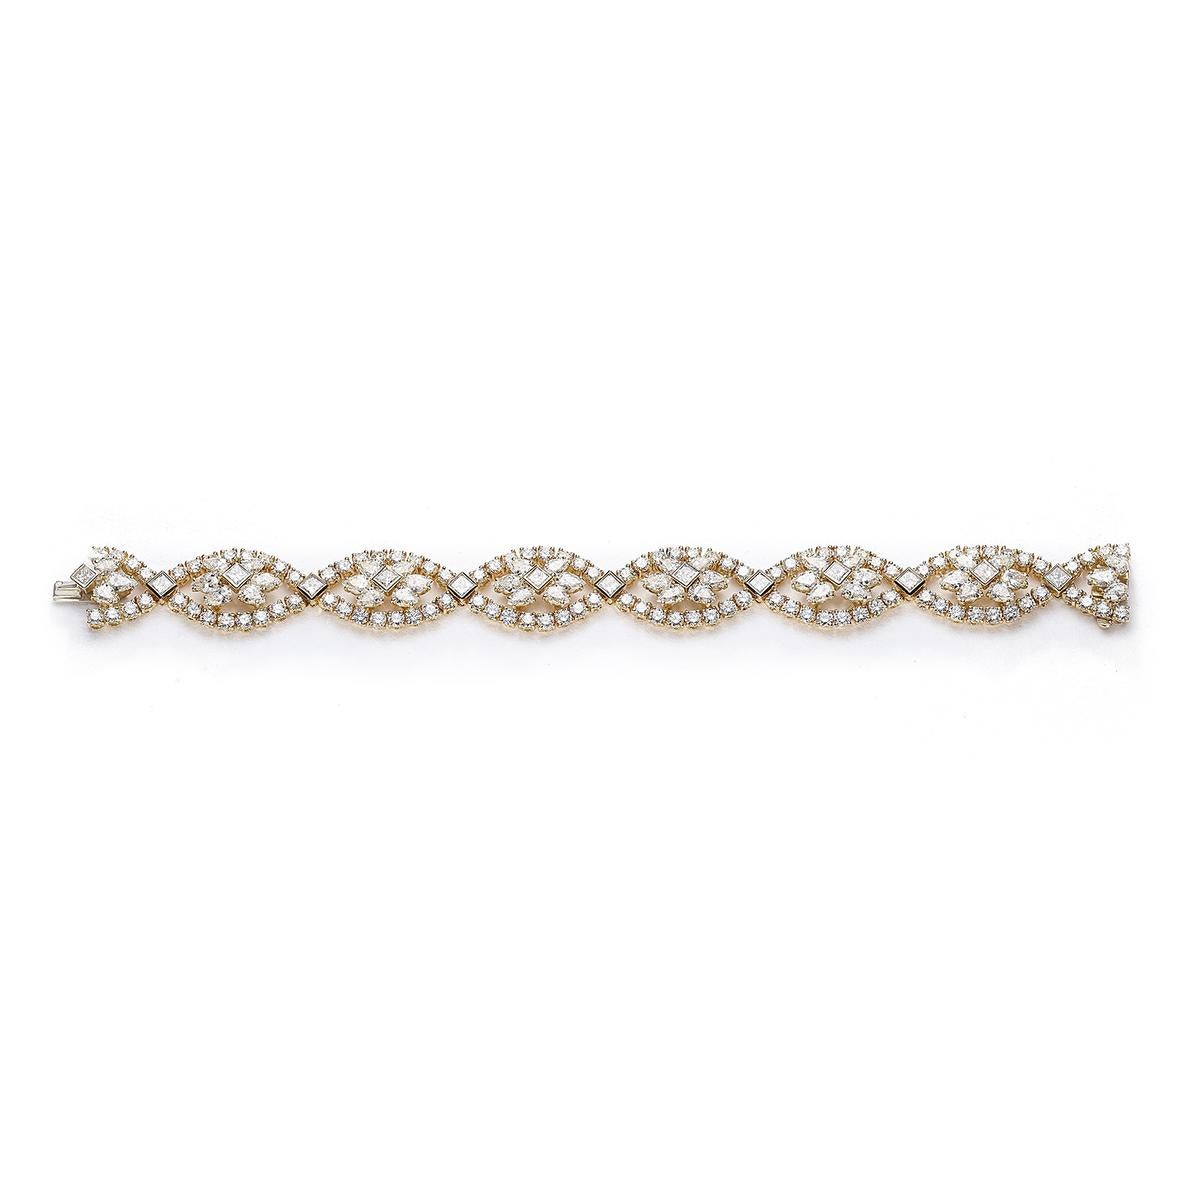 Bracelet in 18kt pink gold set with 168 round and pear-shaped cut diamonds 18.56 cts      